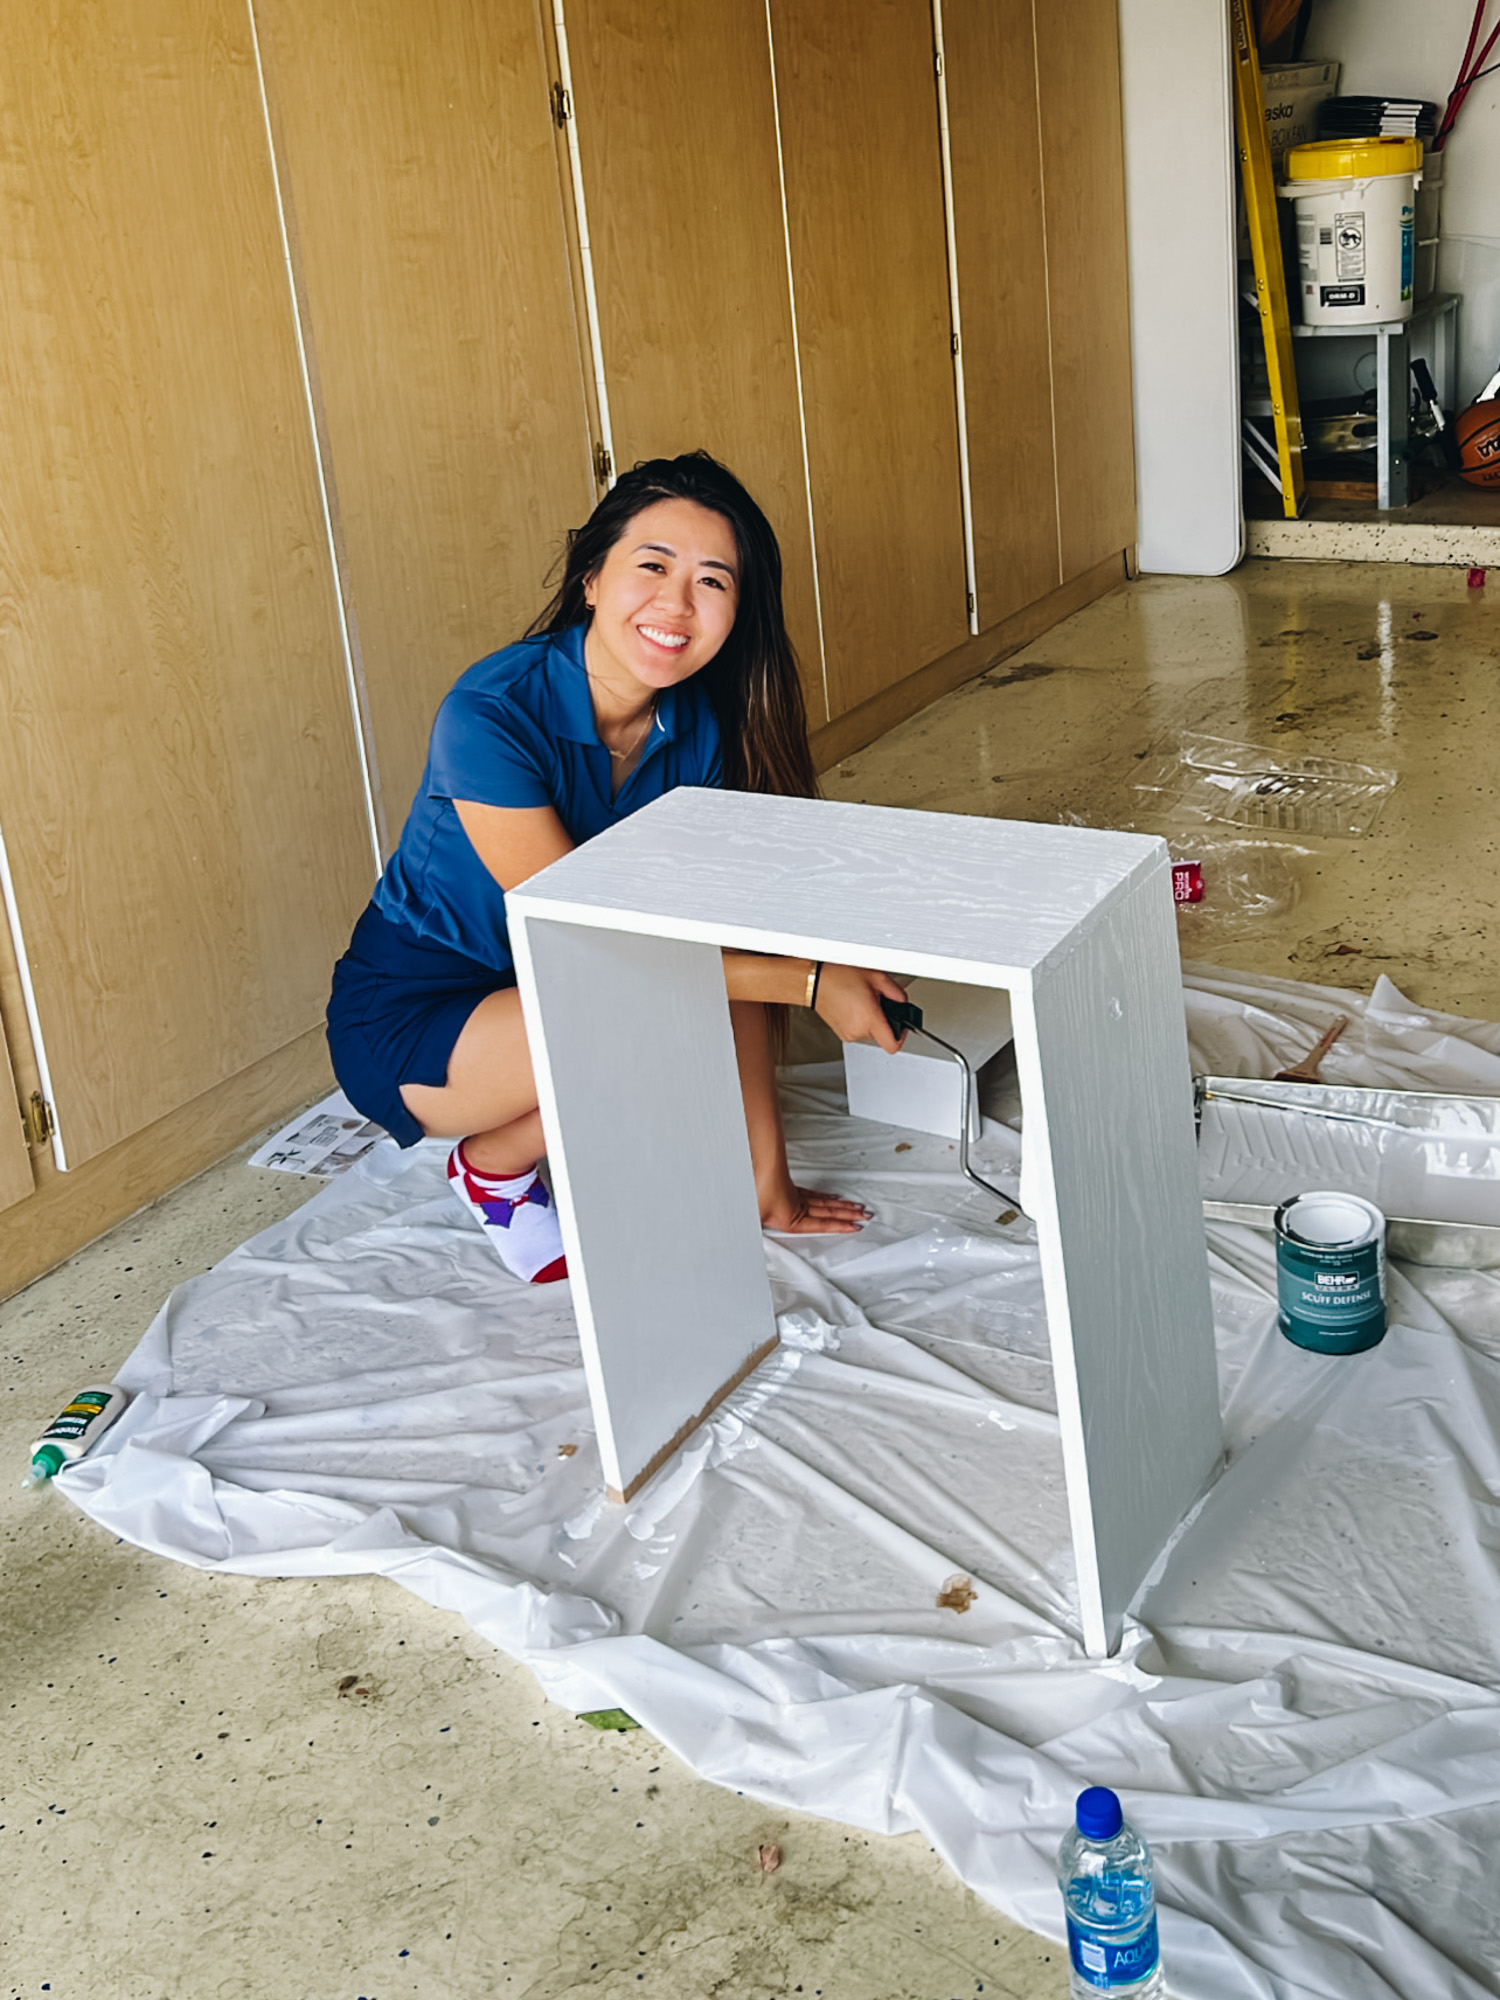 Painting a DIY nightstand